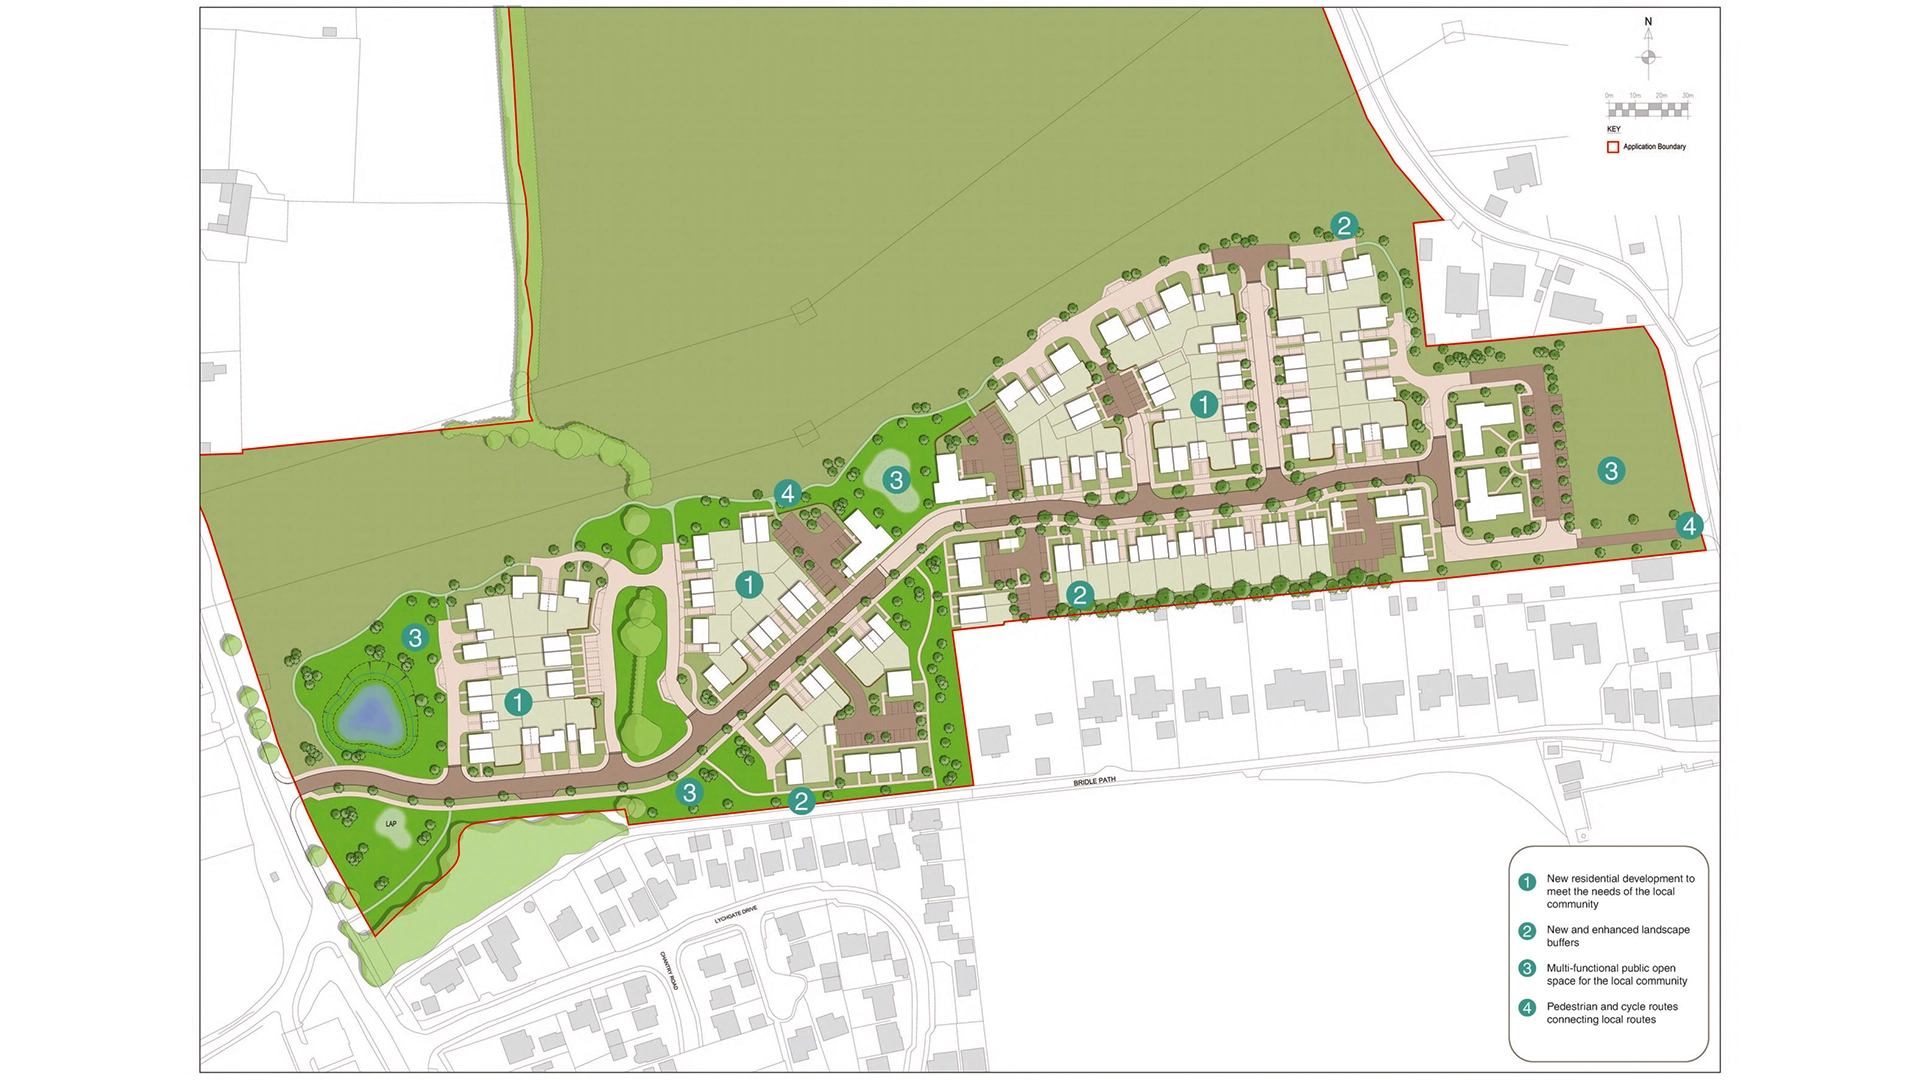 Site Masterplan for Land South of Five Heads Road, Horndean. Planning Application